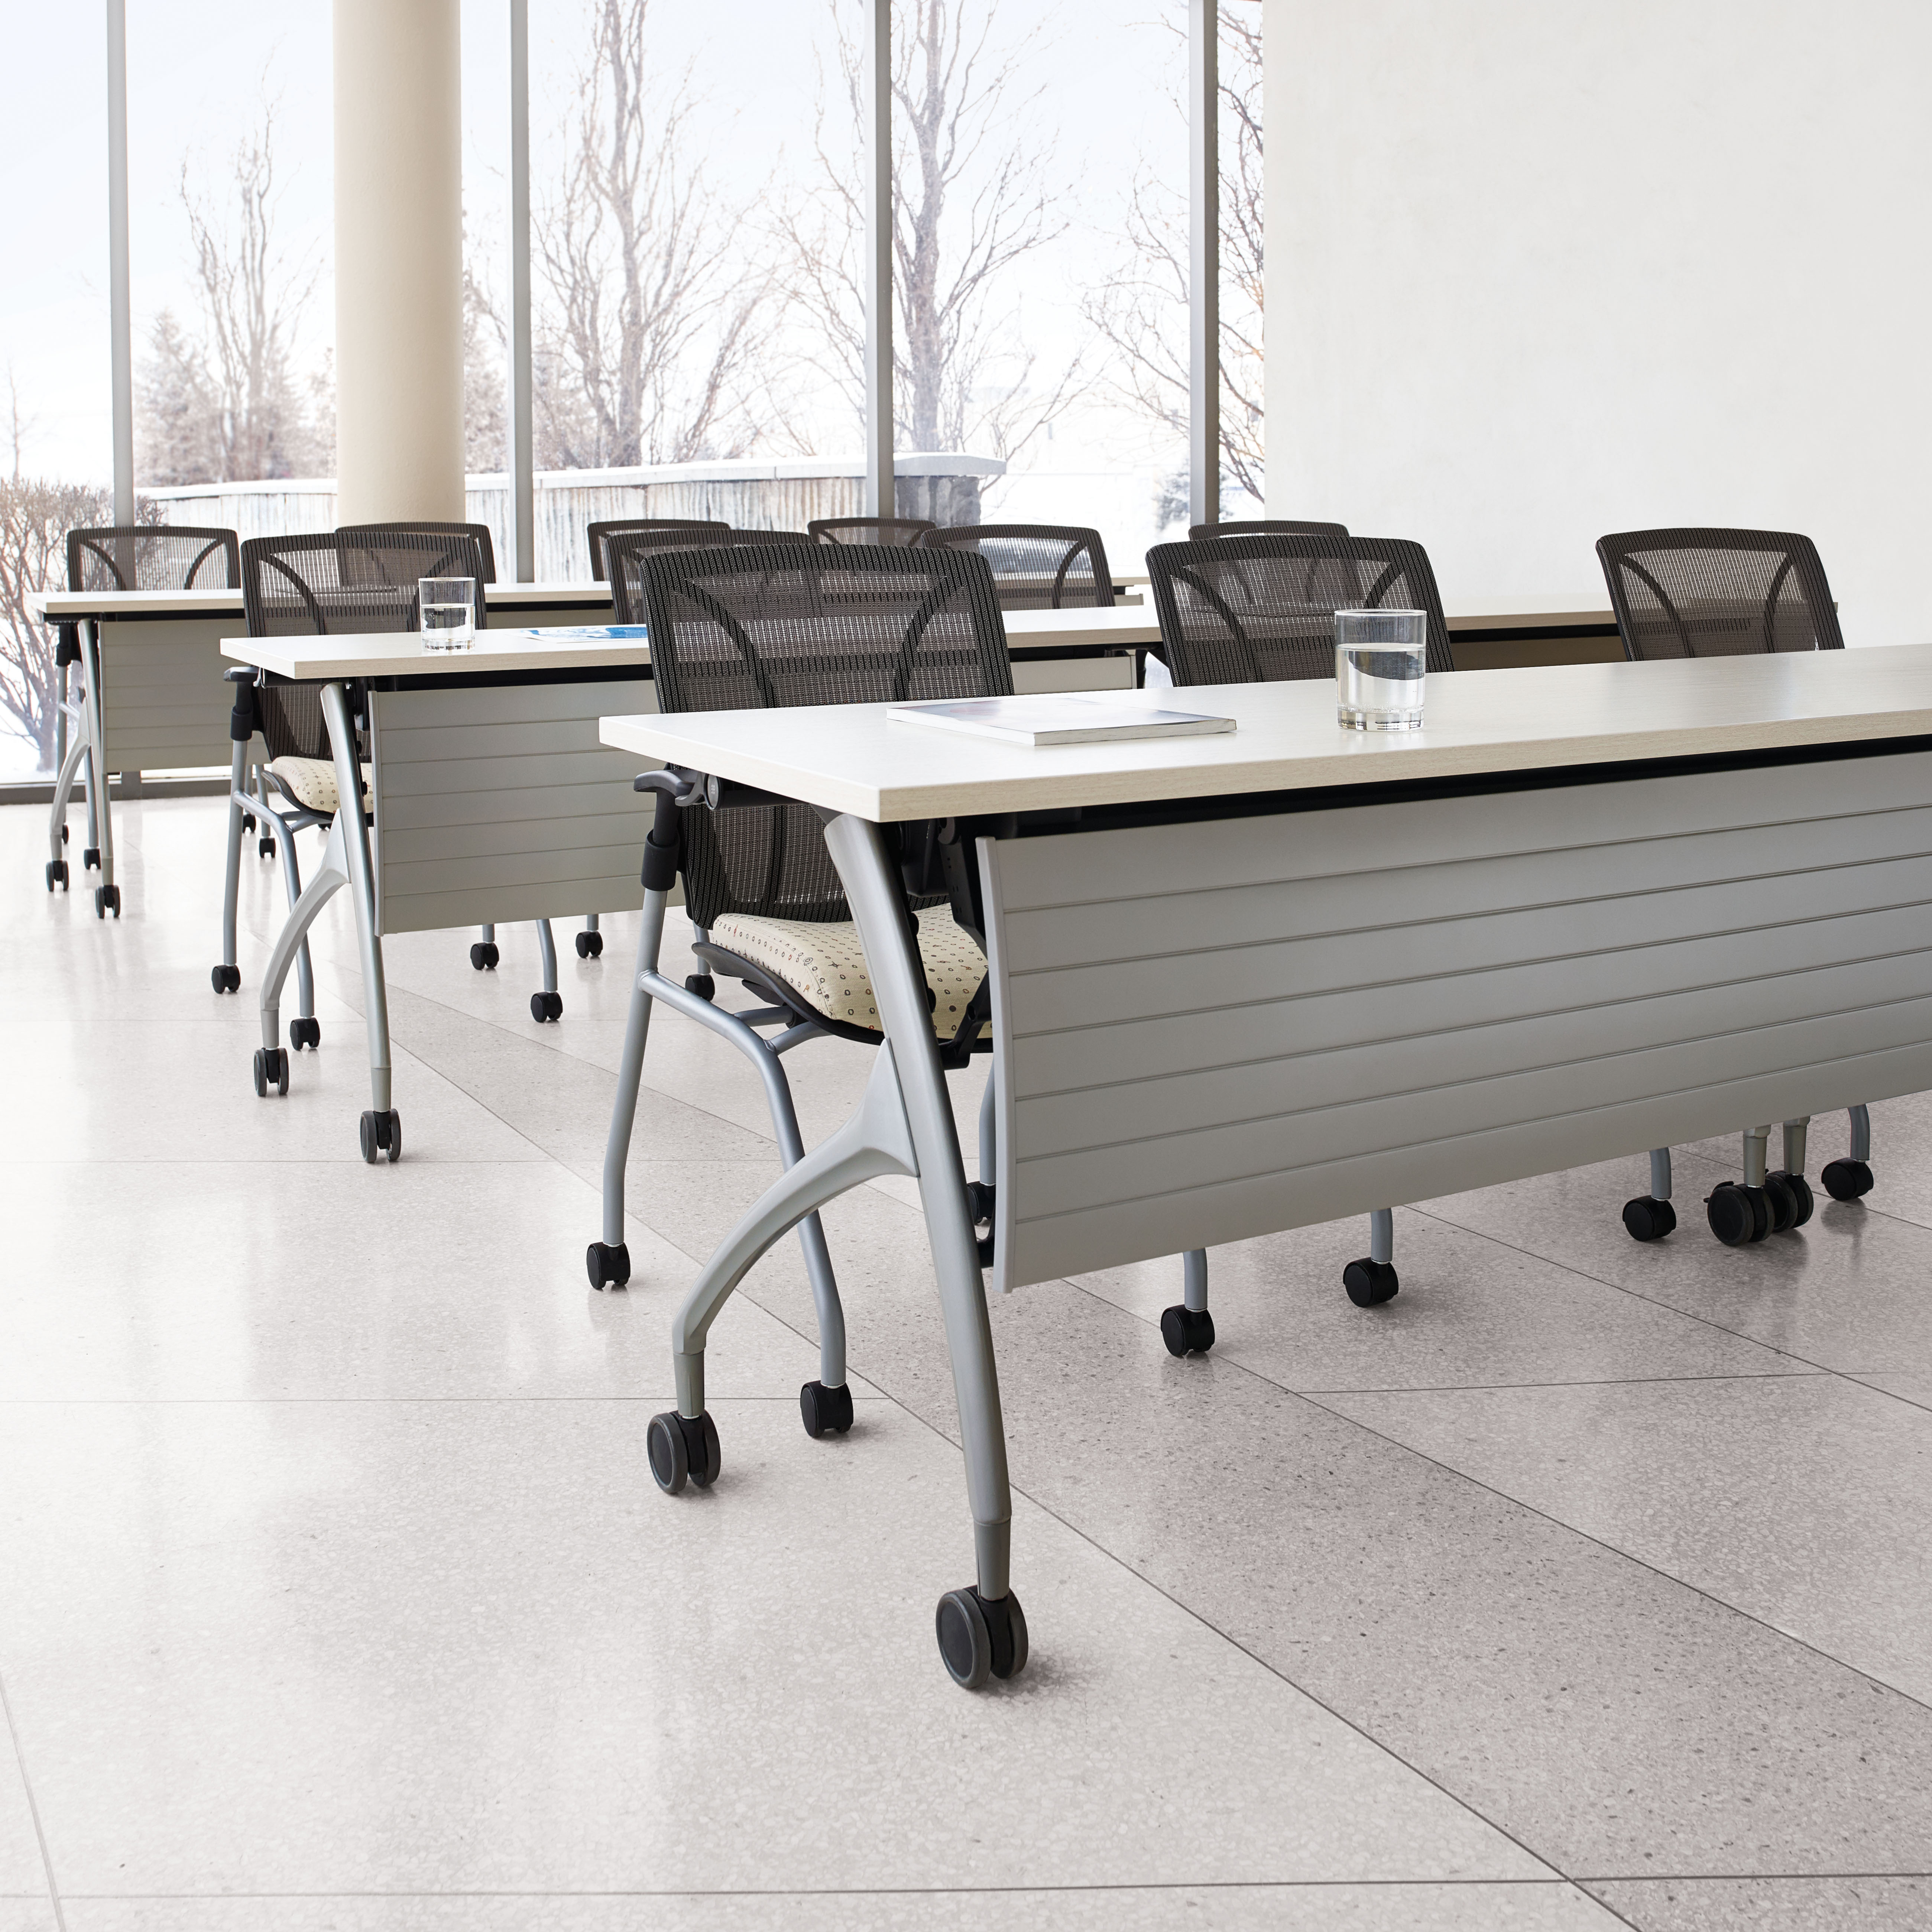 Global Furniture Group, 2gether™ creates dynamic spaces for people to easily connect and learn. Join in rows for the next